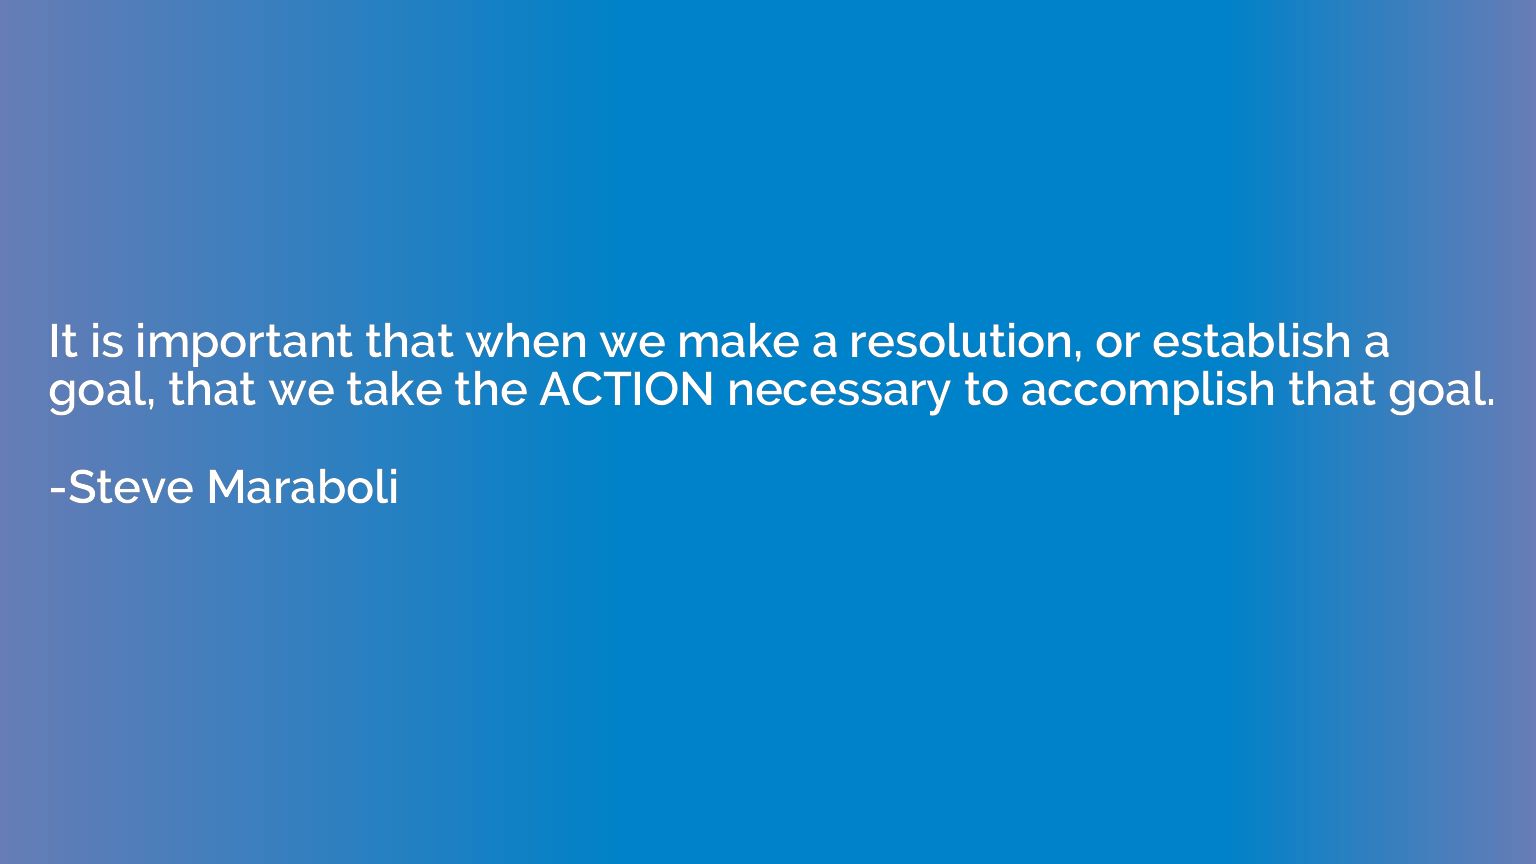 It is important that when we make a resolution, or establish